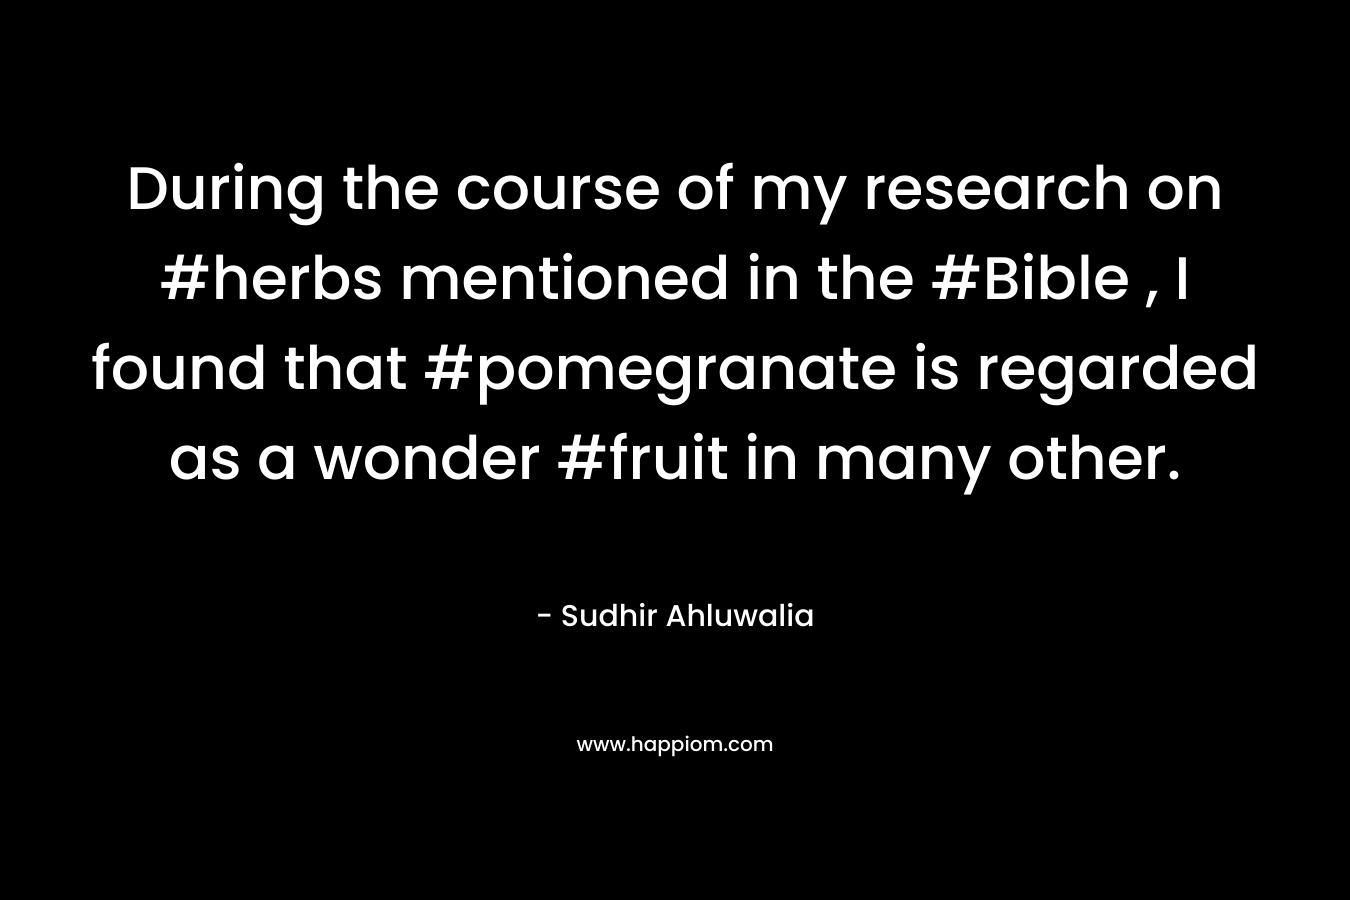 During the course of my research on #herbs mentioned in the #Bible , I found that #pomegranate is regarded as a wonder #fruit in many other. – Sudhir Ahluwalia